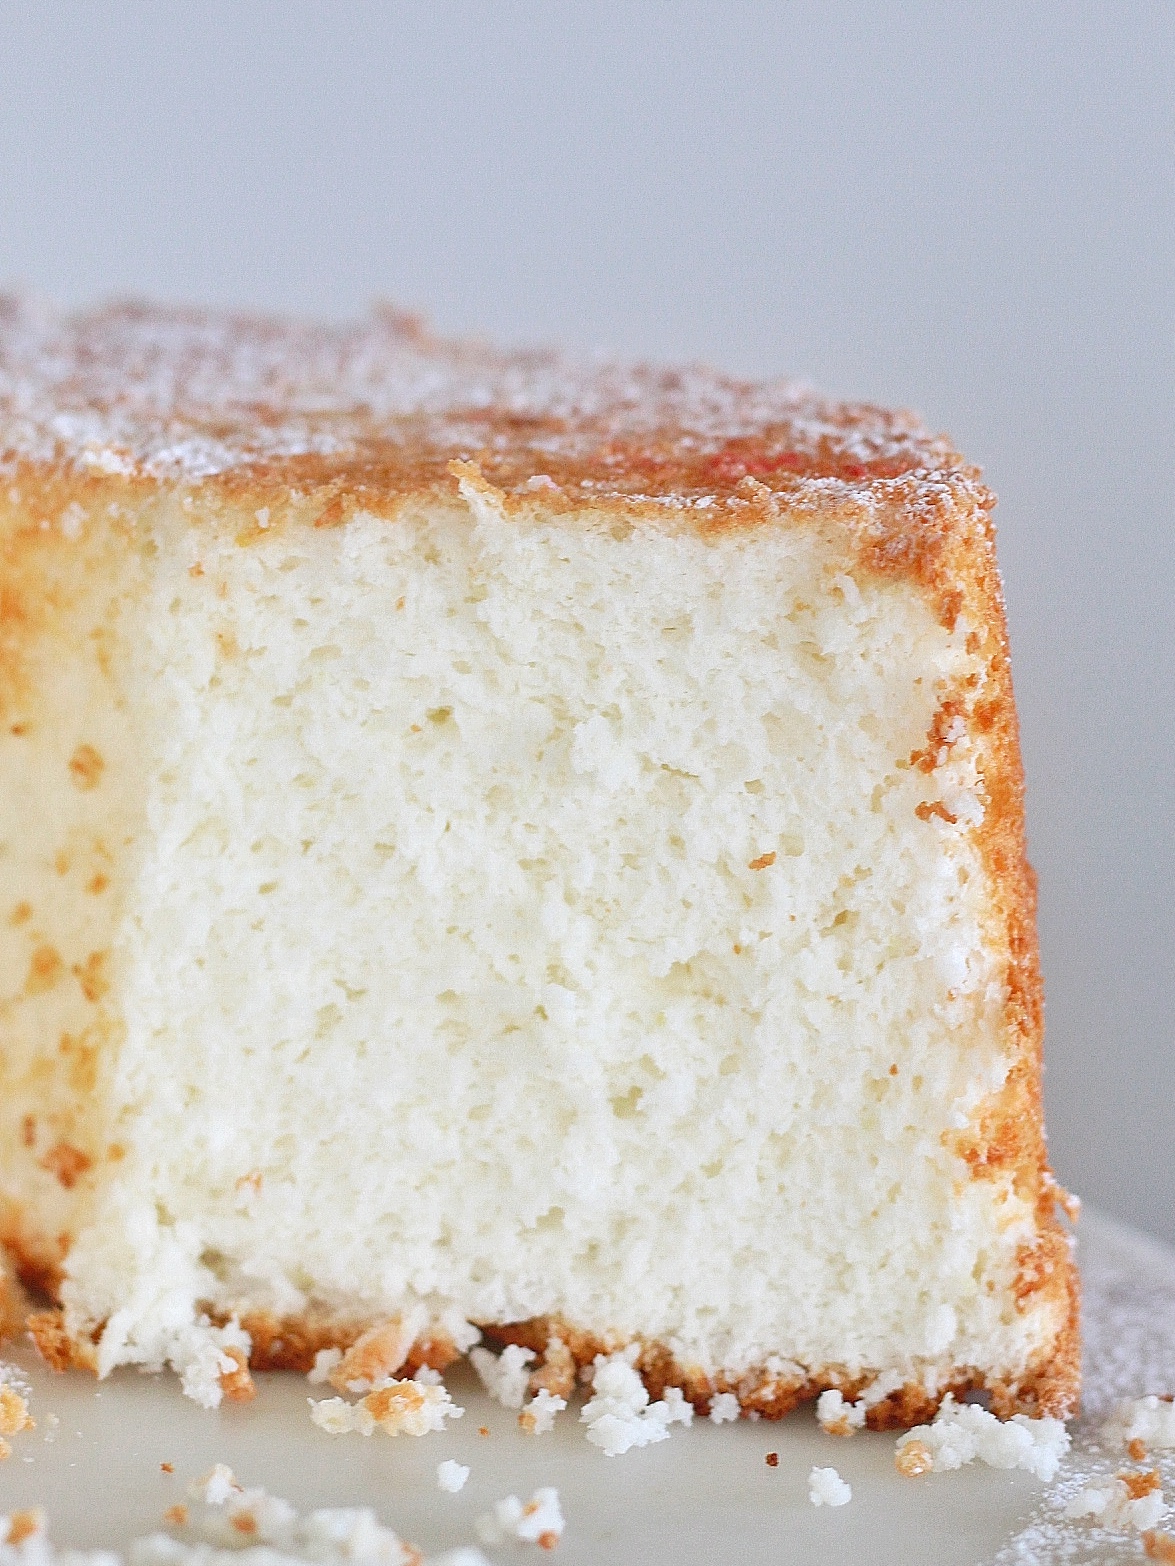 Angel Food Cake Recipe: Light and fluffy angel food cake with a hint of citrus. #angelfoodcake #angelfoodcakerecipe #angelfood #angelcake #easyangelfoodcakerecipe #cakebycourtney